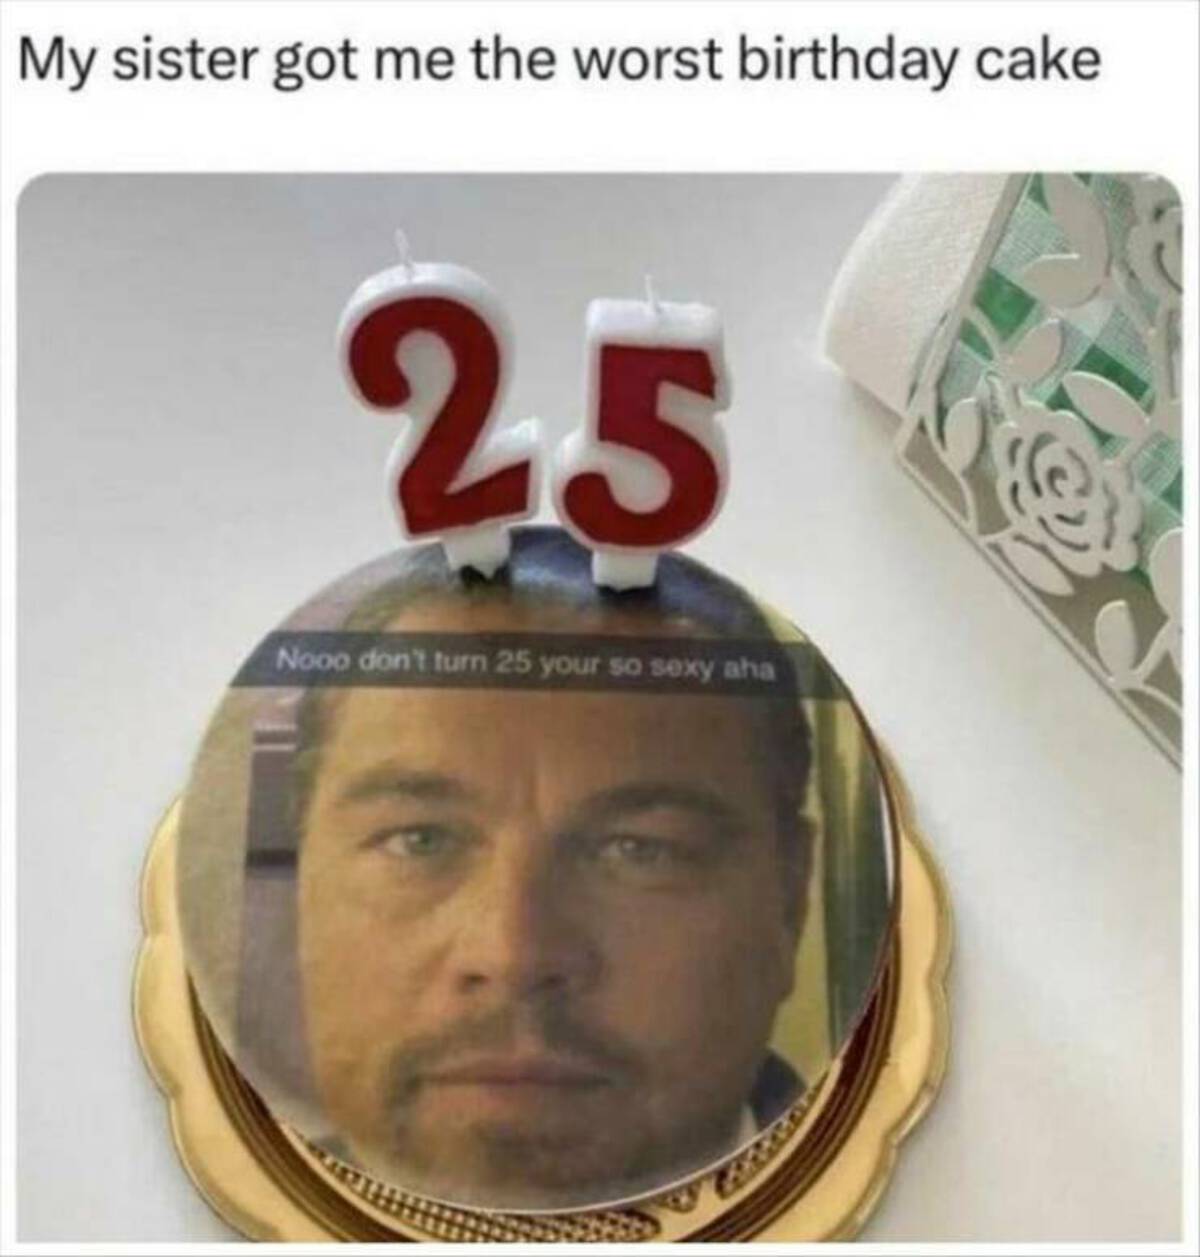 My sister got me the worst birthday cake 25 Nooo don't turn 25 your so sexy aha